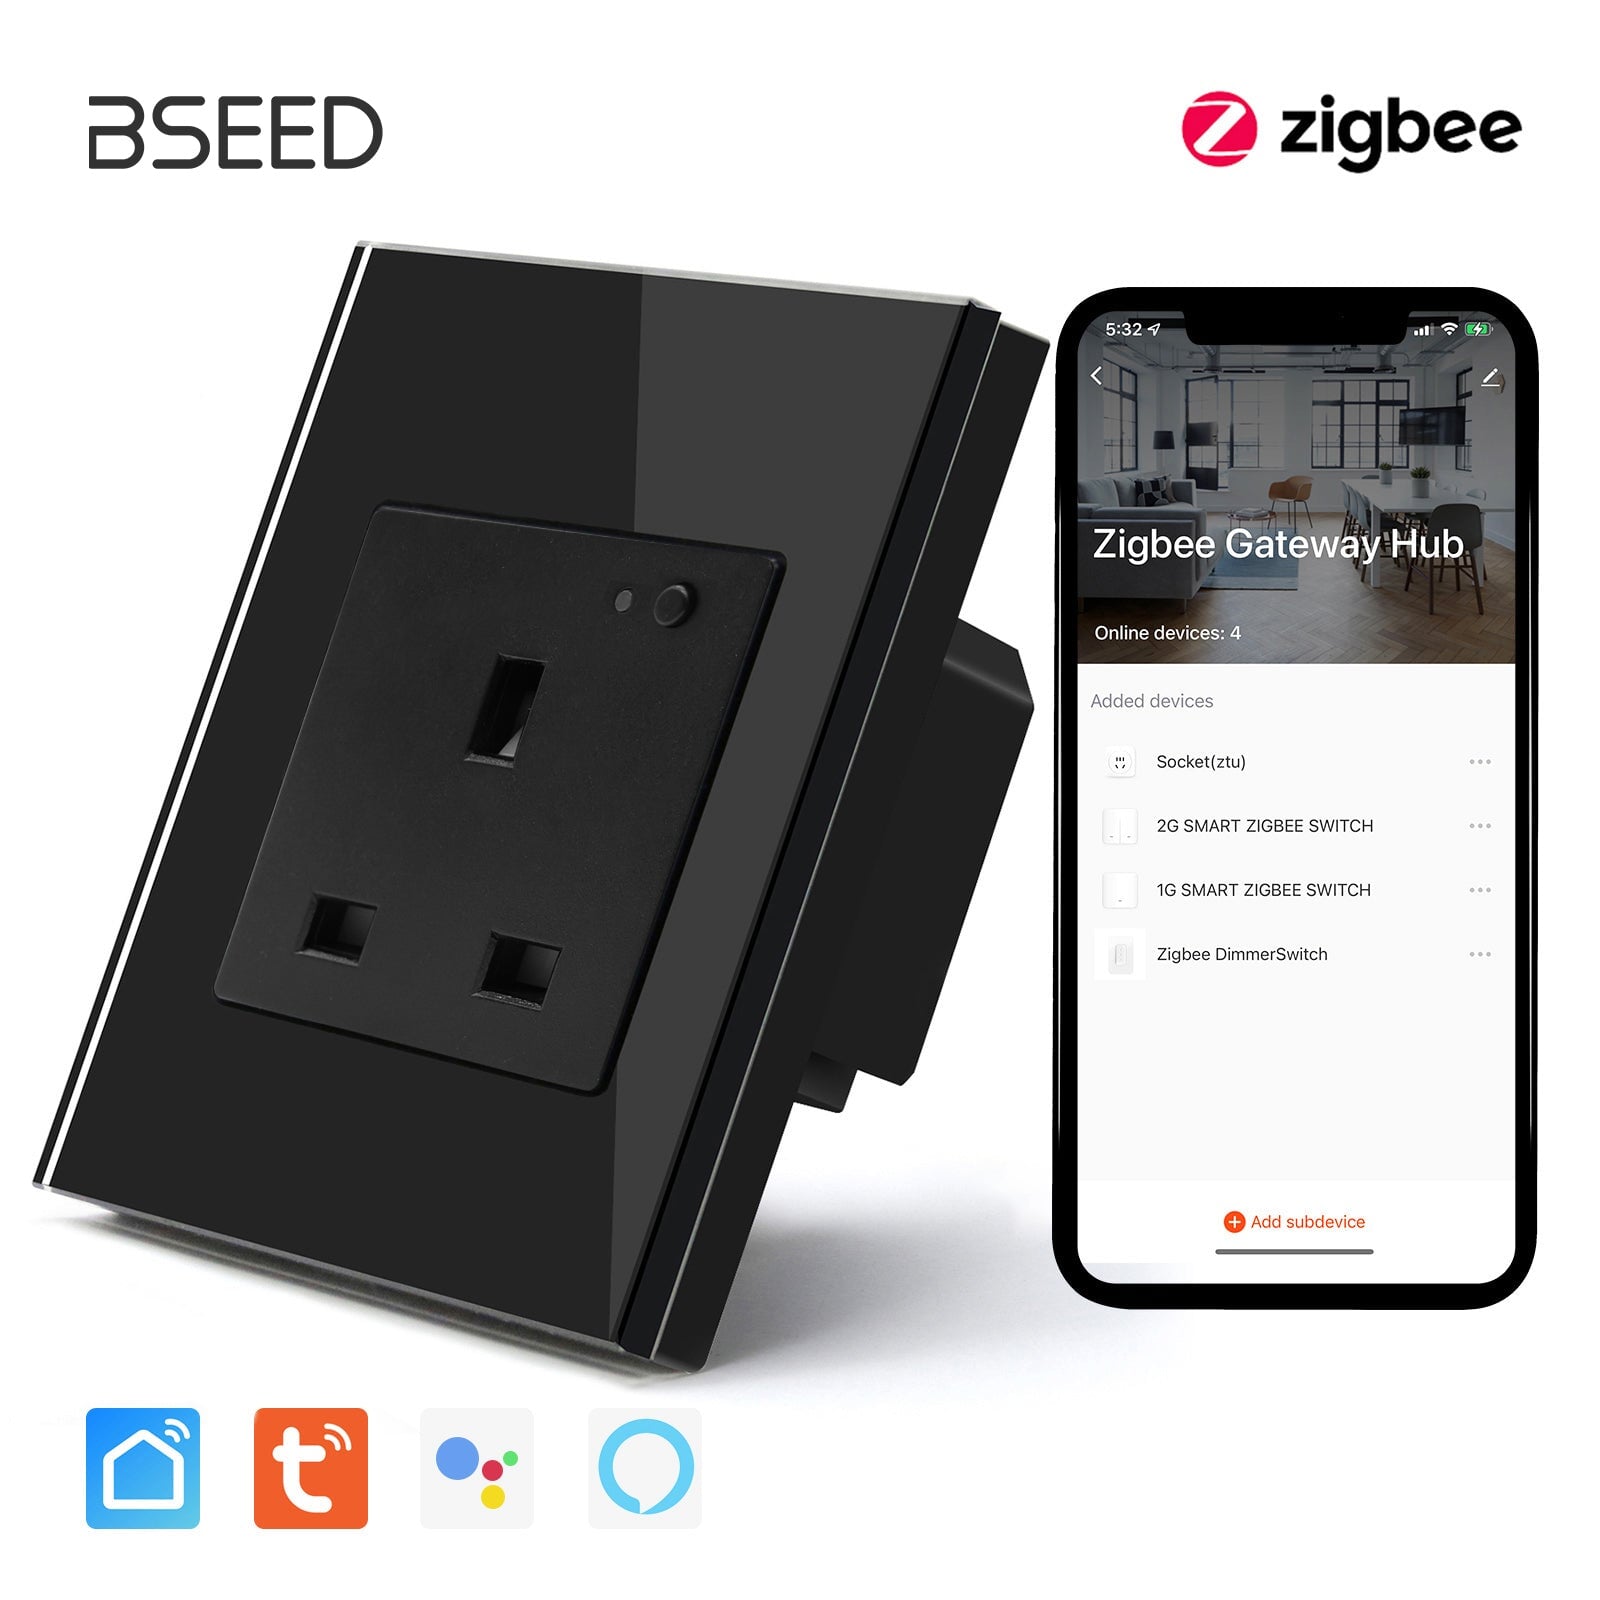 BSEED ZigBee UK Wall Sockets Power Outlets Kids Protection Wall Plates & Covers Bseedswitch black Signle 